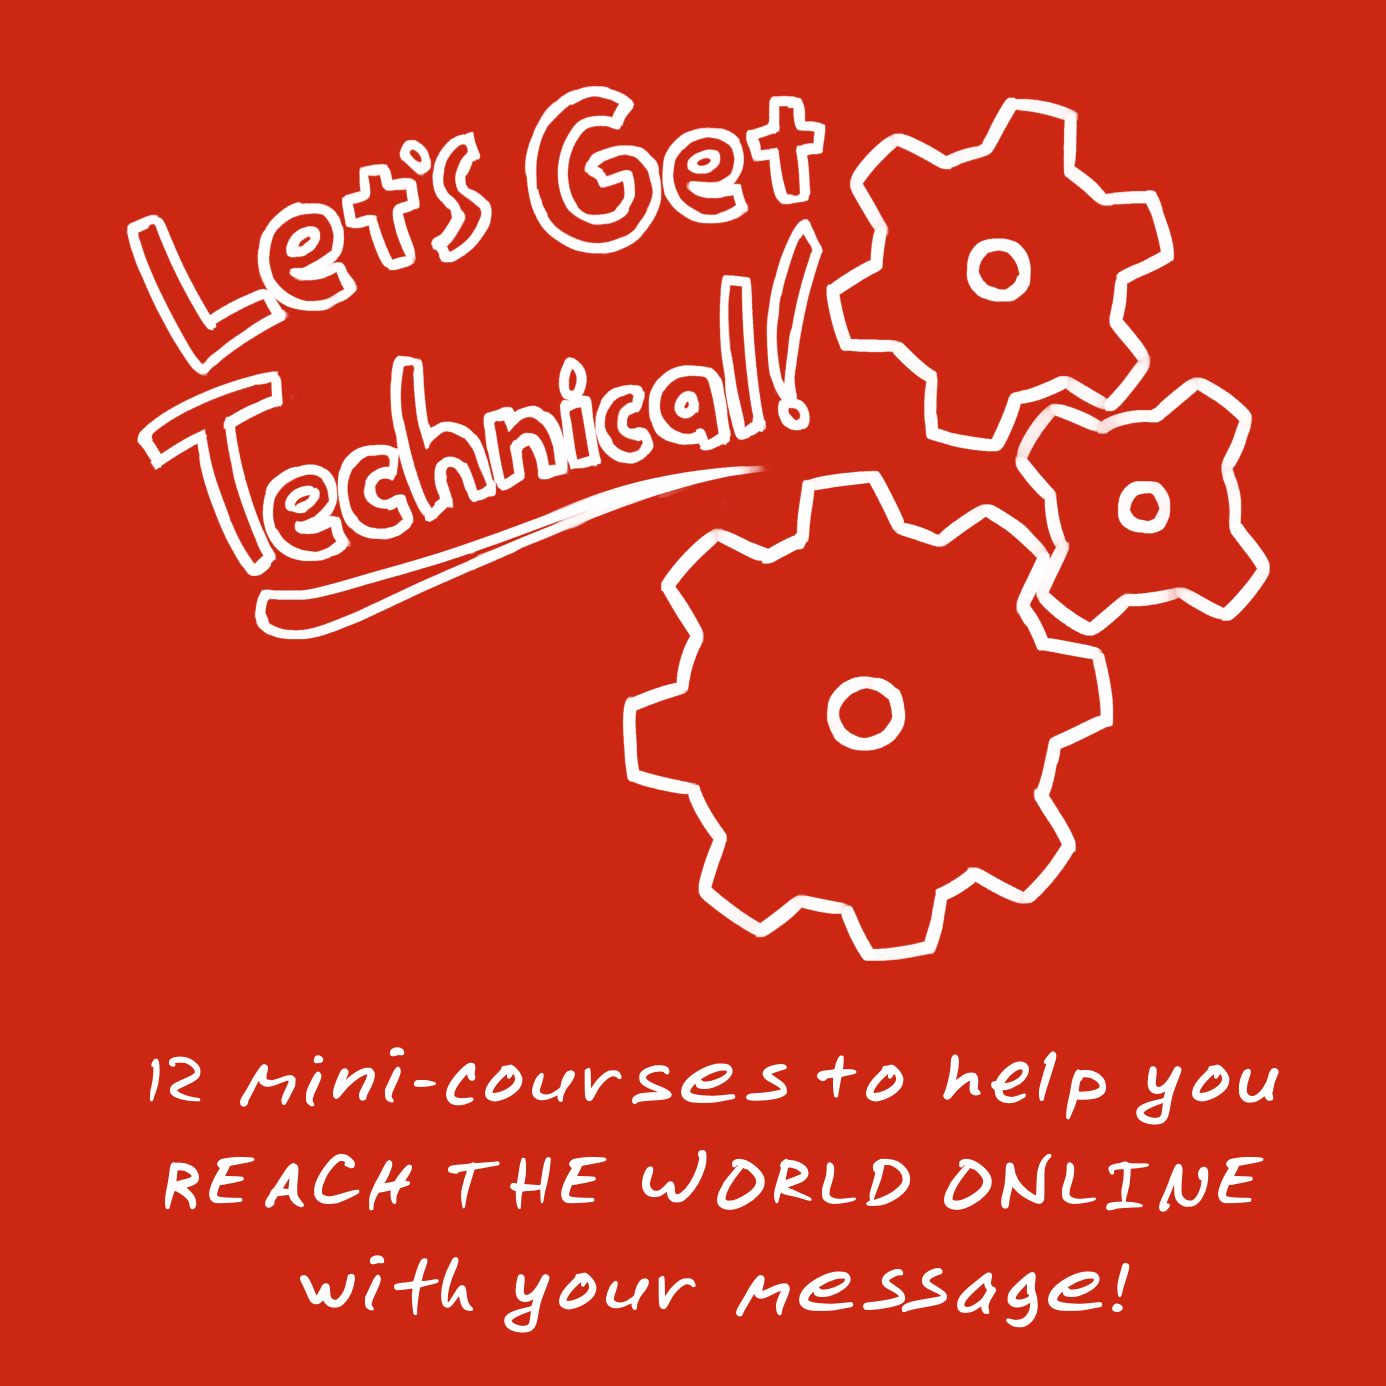 "Let's Get Technical!" 12 mini-courses to help you REACH THE WORLD with your message!